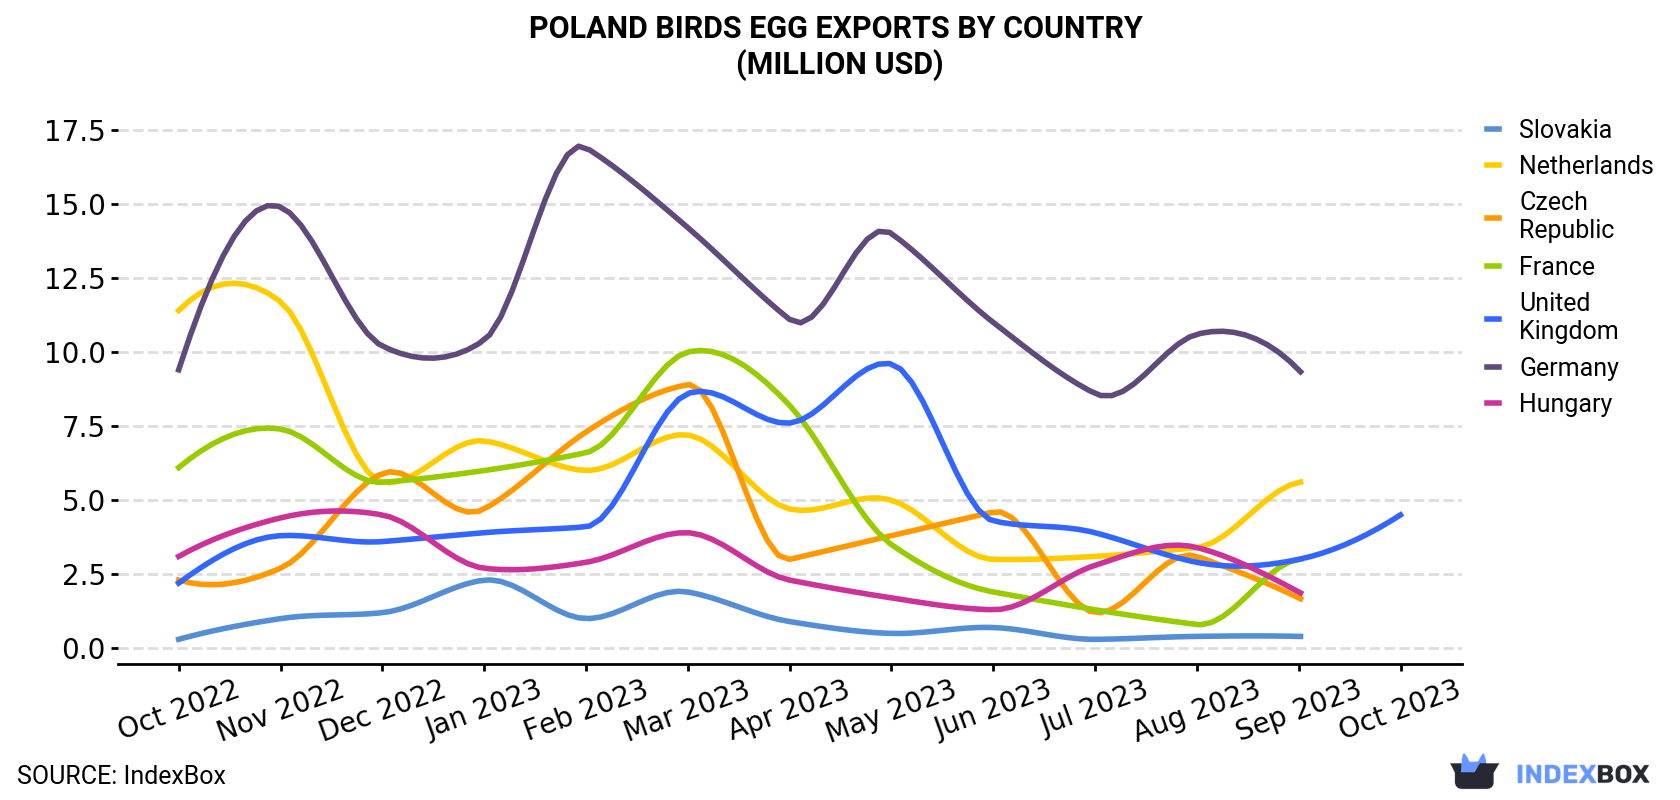 Poland Birds Egg Exports By Country (Million USD)